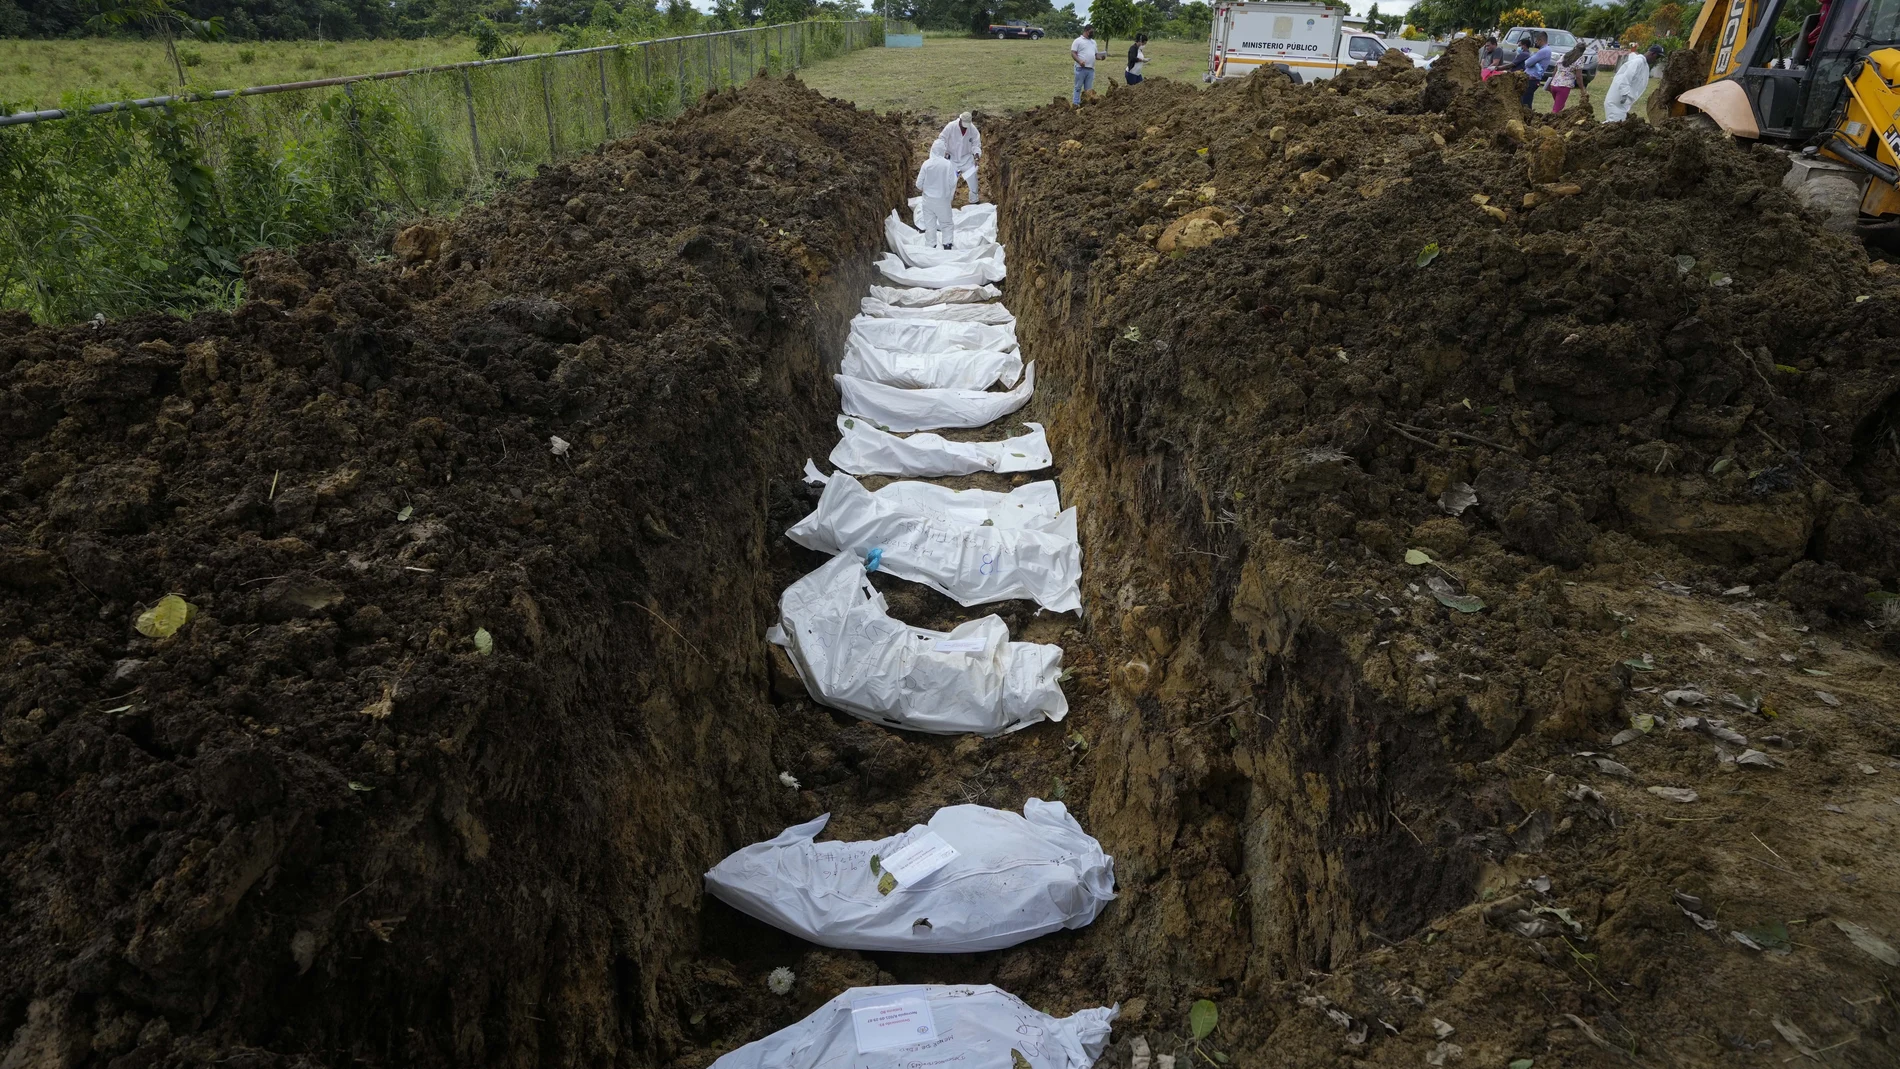 A forensics team burys a group of migrants who died trying to cross the Darien gap, at the Guayabillo cemetery in Agua Fria, Panama, Thursday, Sept. 30, 2021. (AP Photo/Arnulfo Franco)